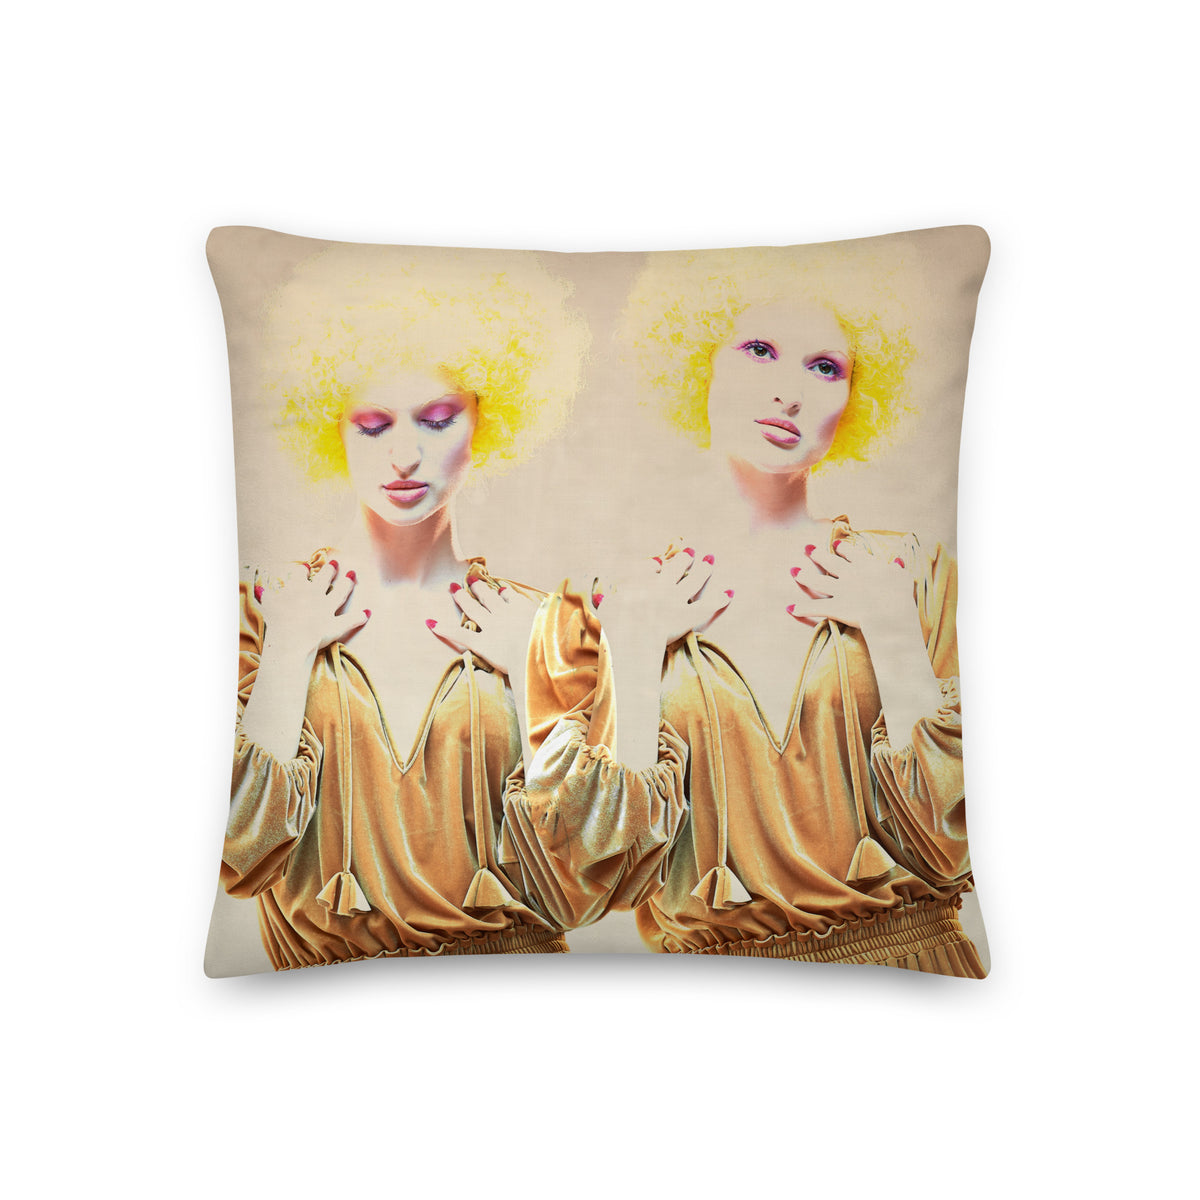 premium pillow with a photo of Gemini twins in a vintage gold dress with yellow curly hair